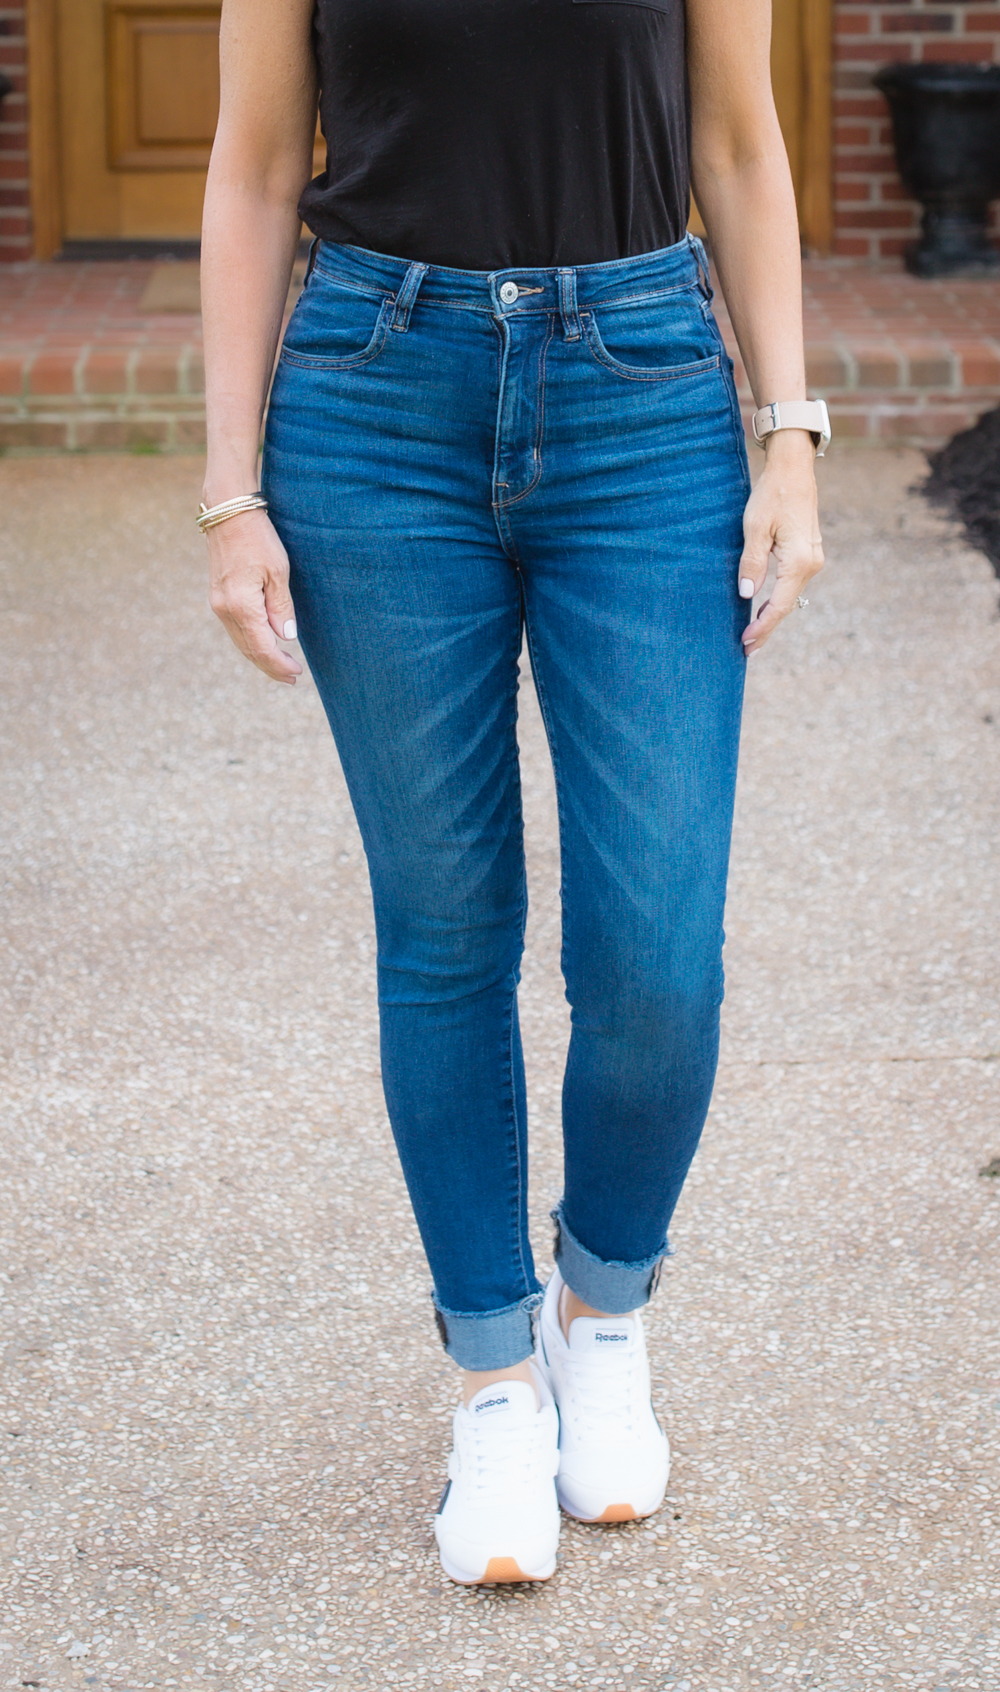 5 Brands of Jeans and How They Look Front and Back